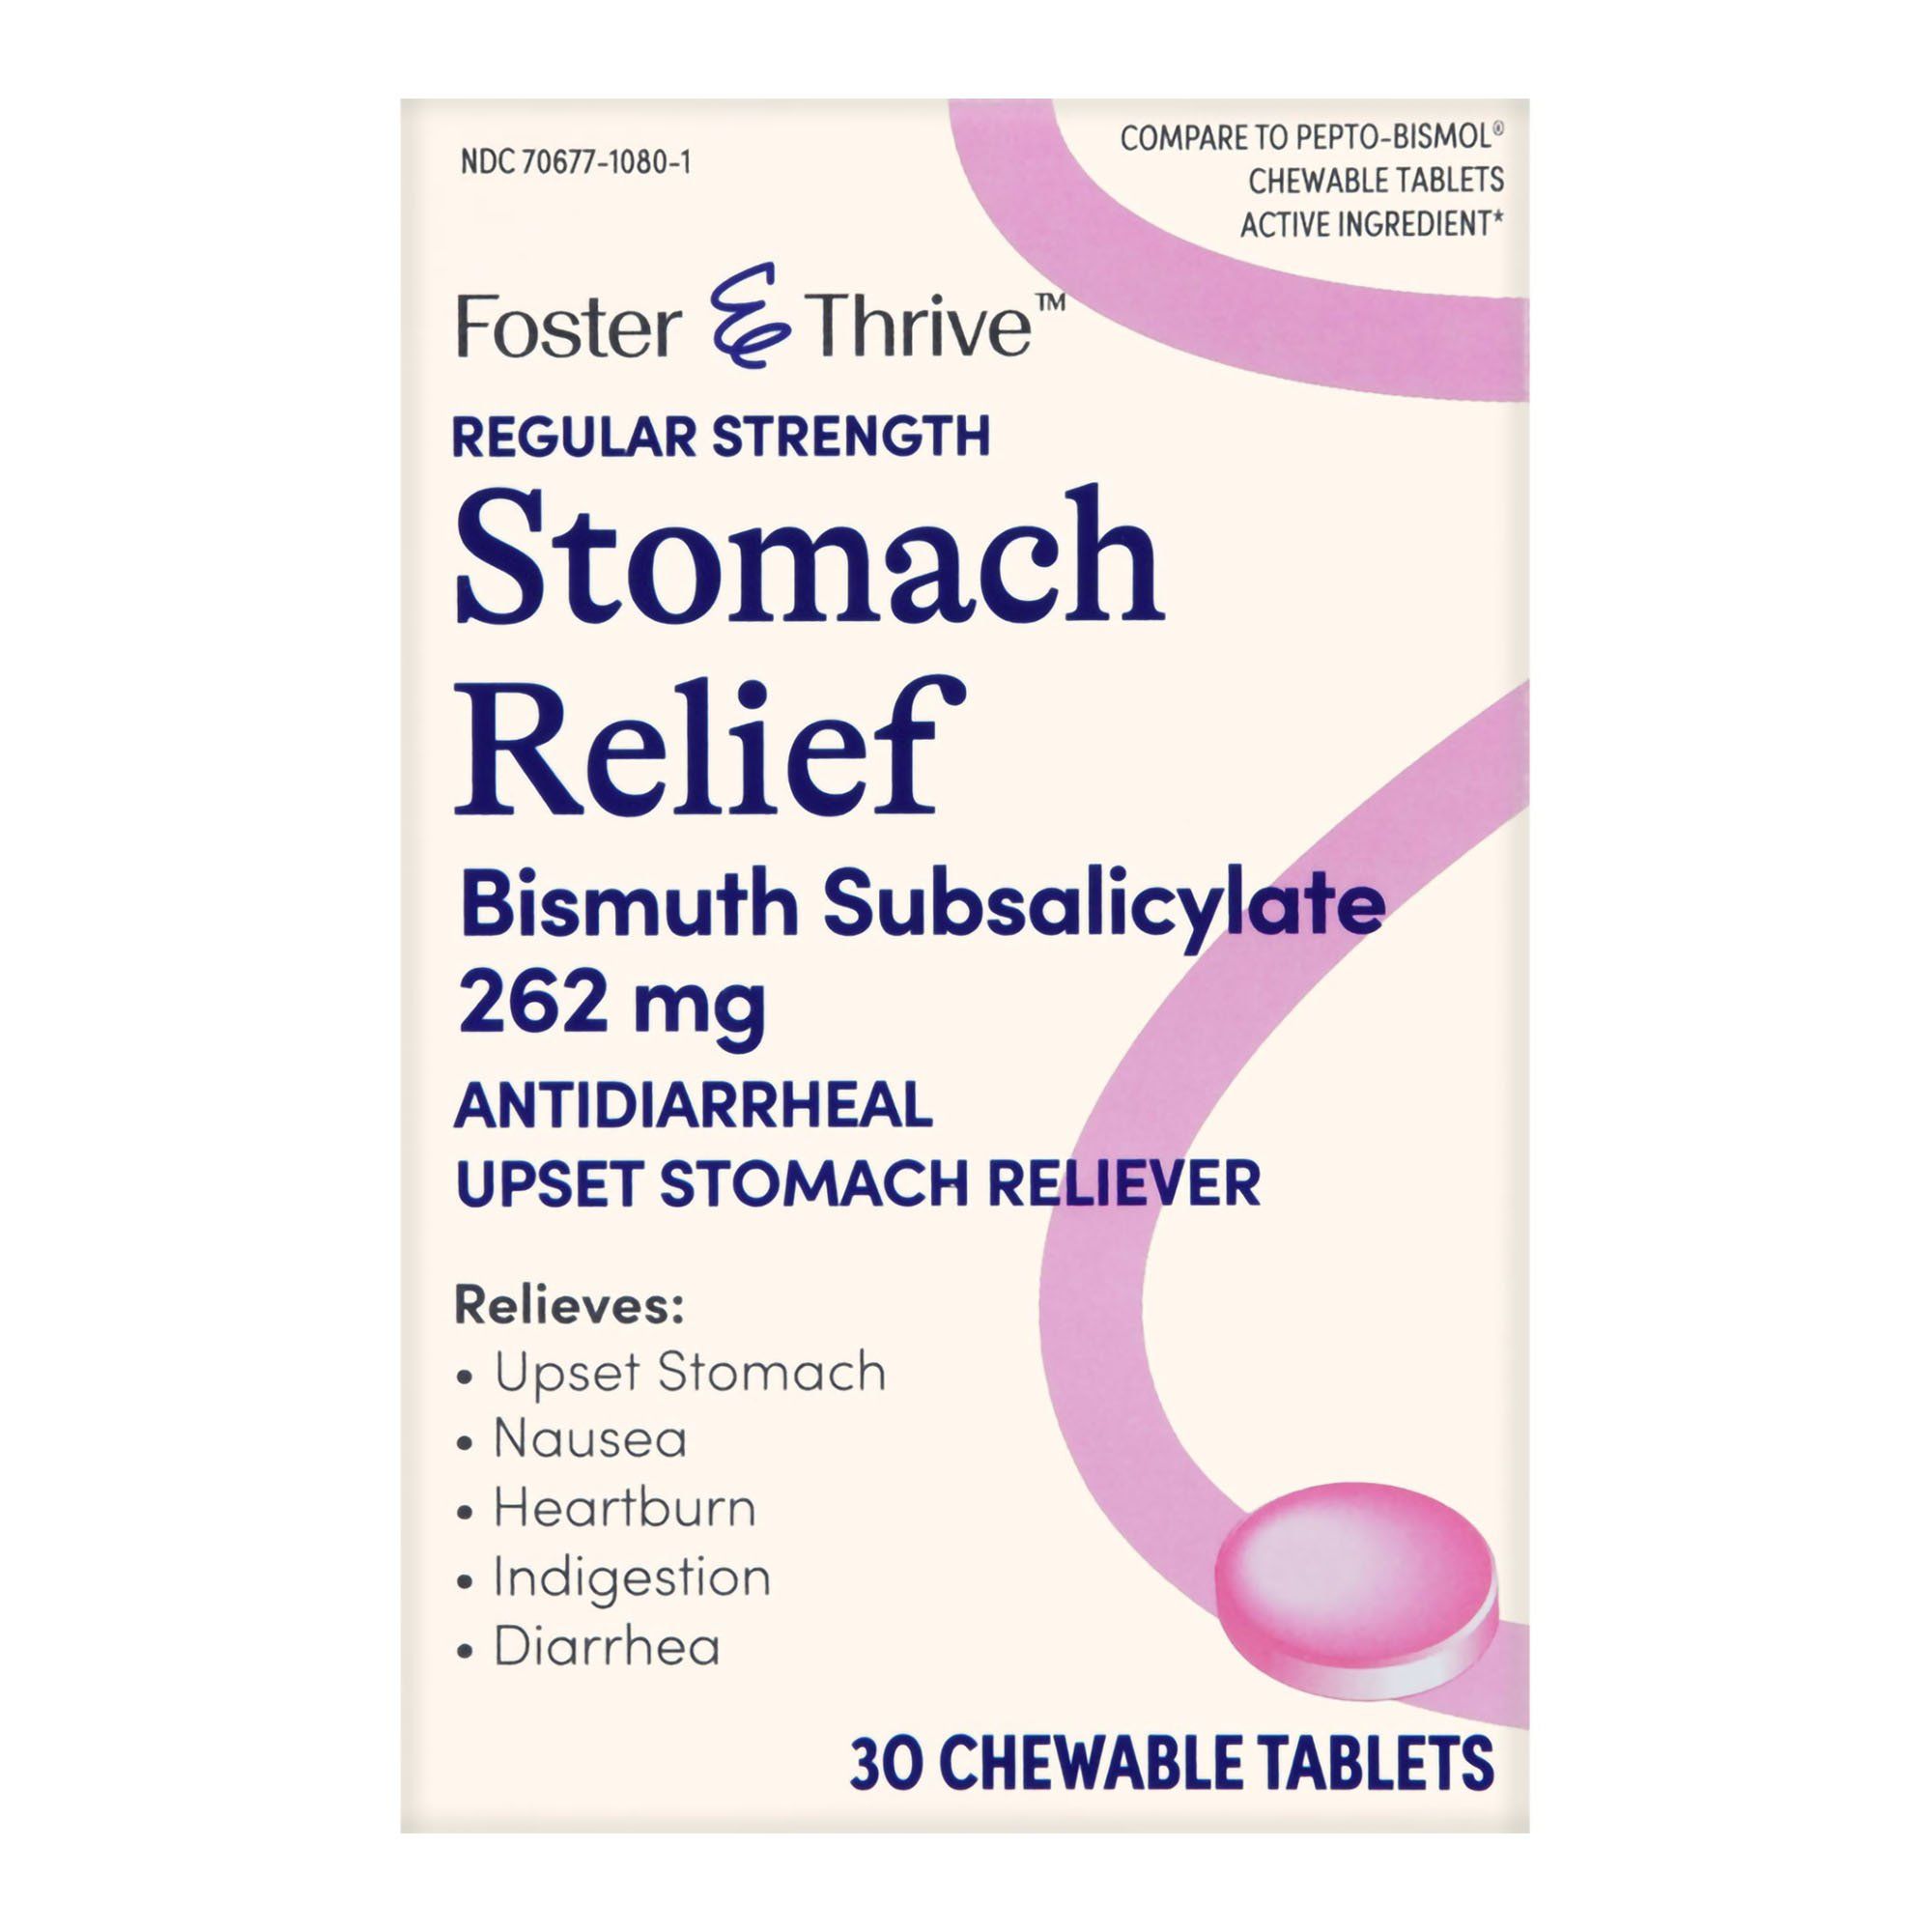 Foster & Thrive Regular Strength Stomach Relief Bismuth Salicylate Chewable Tablets, 262 mg -  30 ct